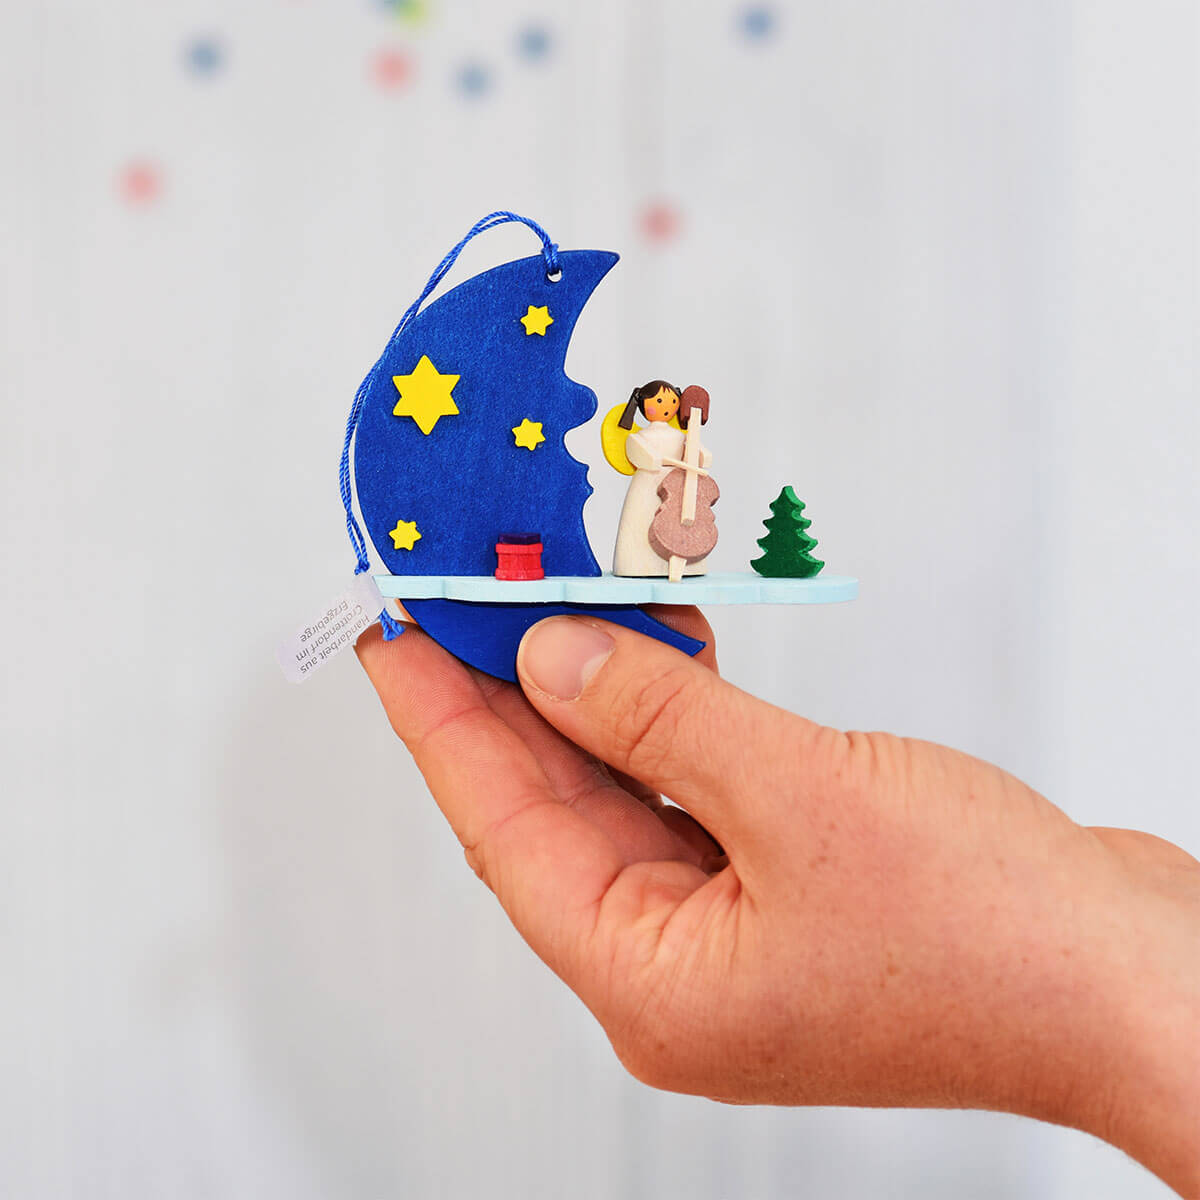 Moon & Cloud 'Angel' Ornament with piano